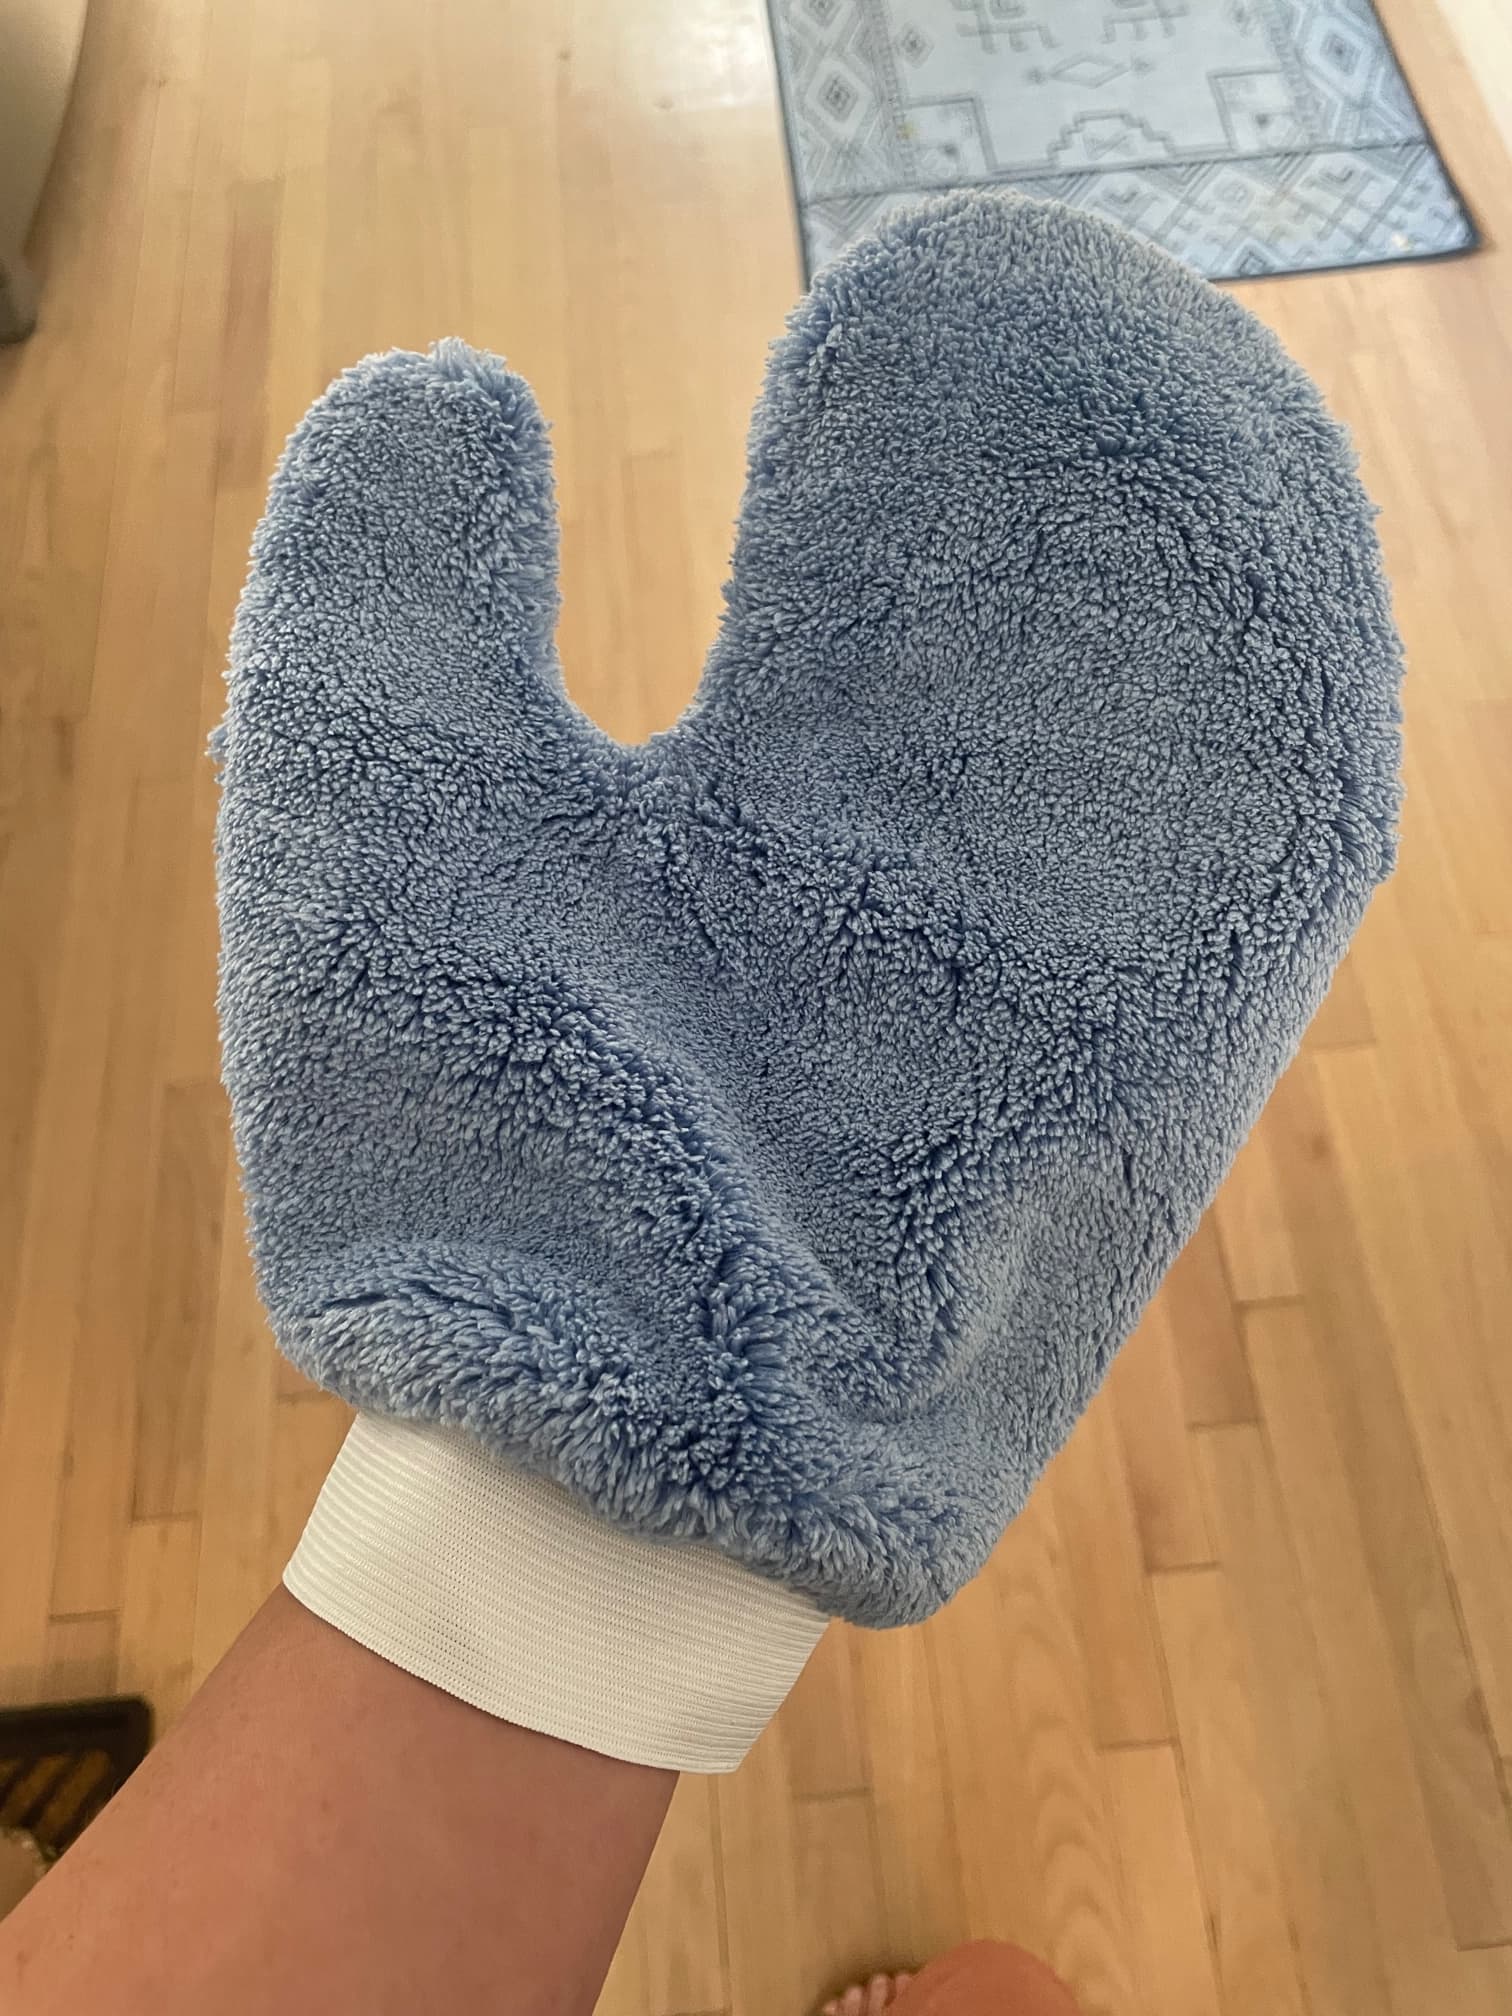 TidyUps 4-Pc Microfiber Dusting Gloves and Glass Cleaning Mitts in Blue